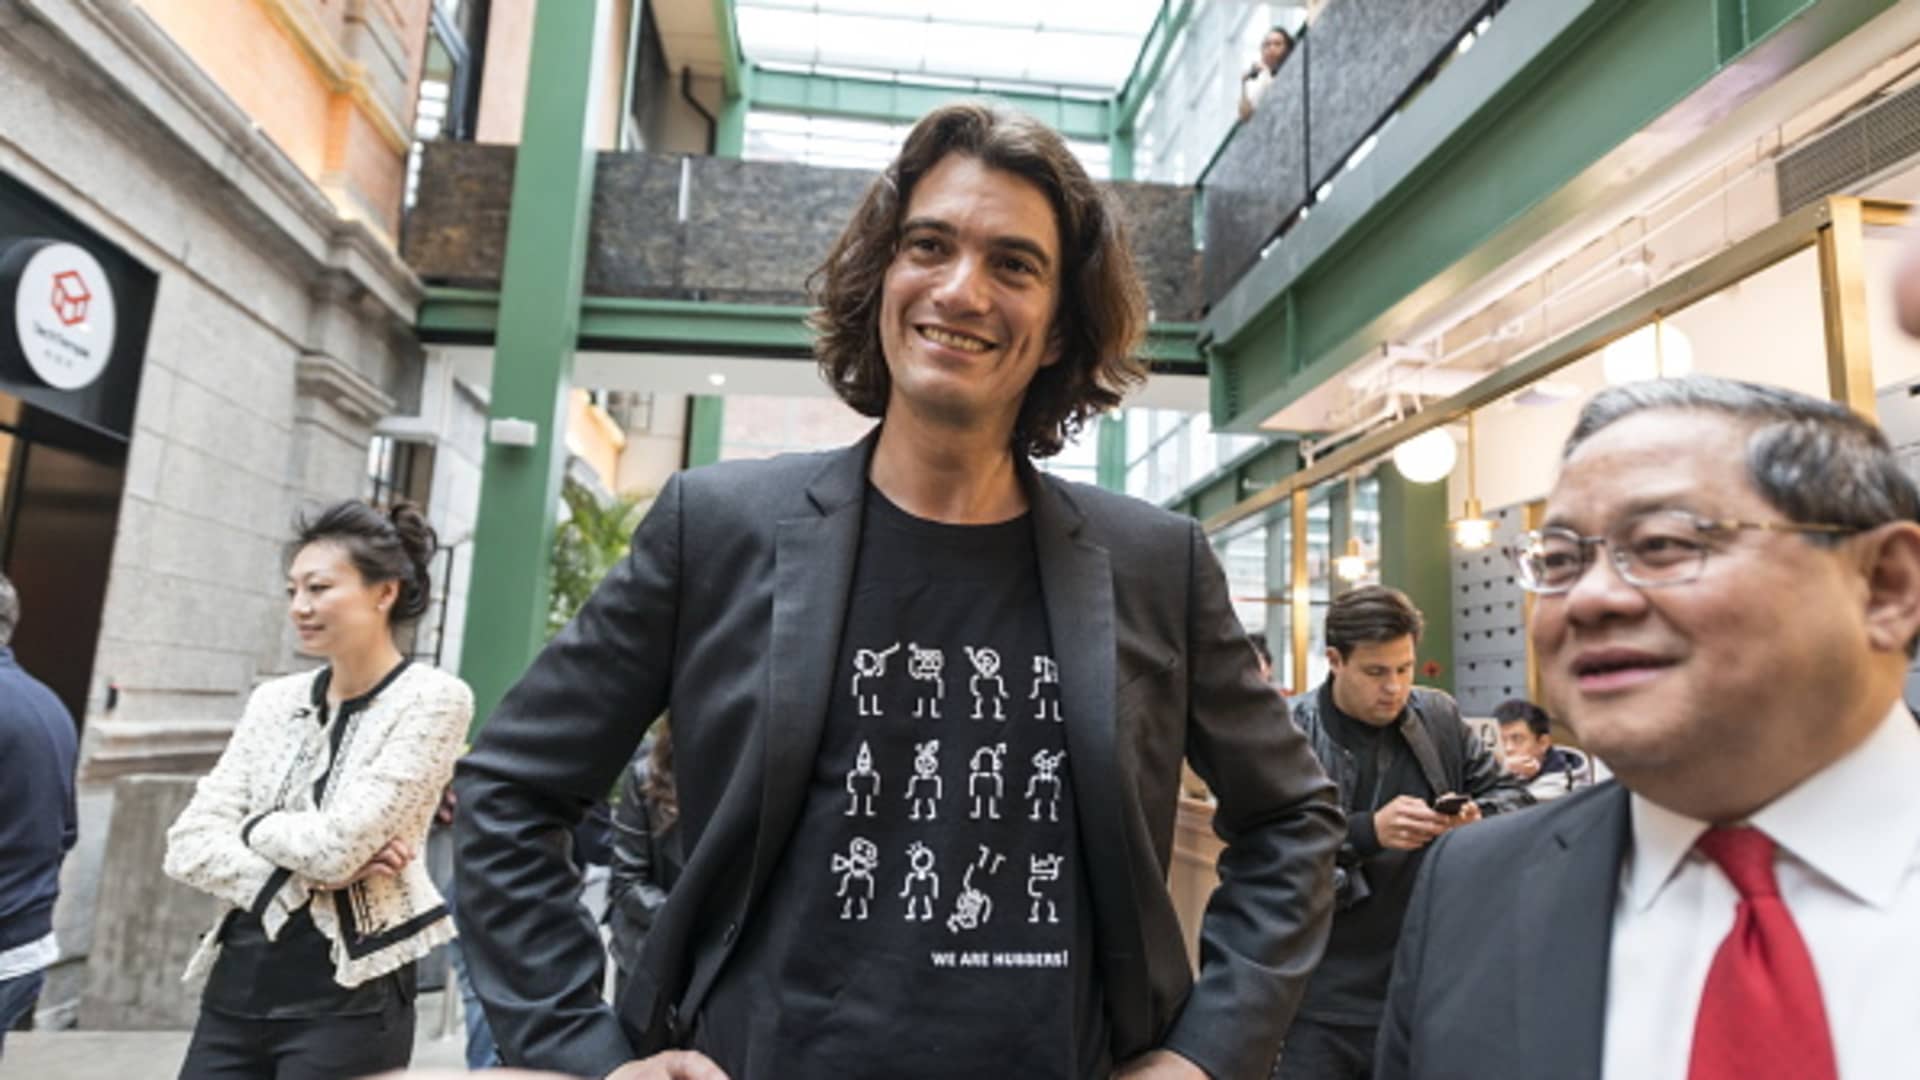 Adam Neumann makes a $500 million bid for WeWork that could hit $900 million if financing and diligence firm up